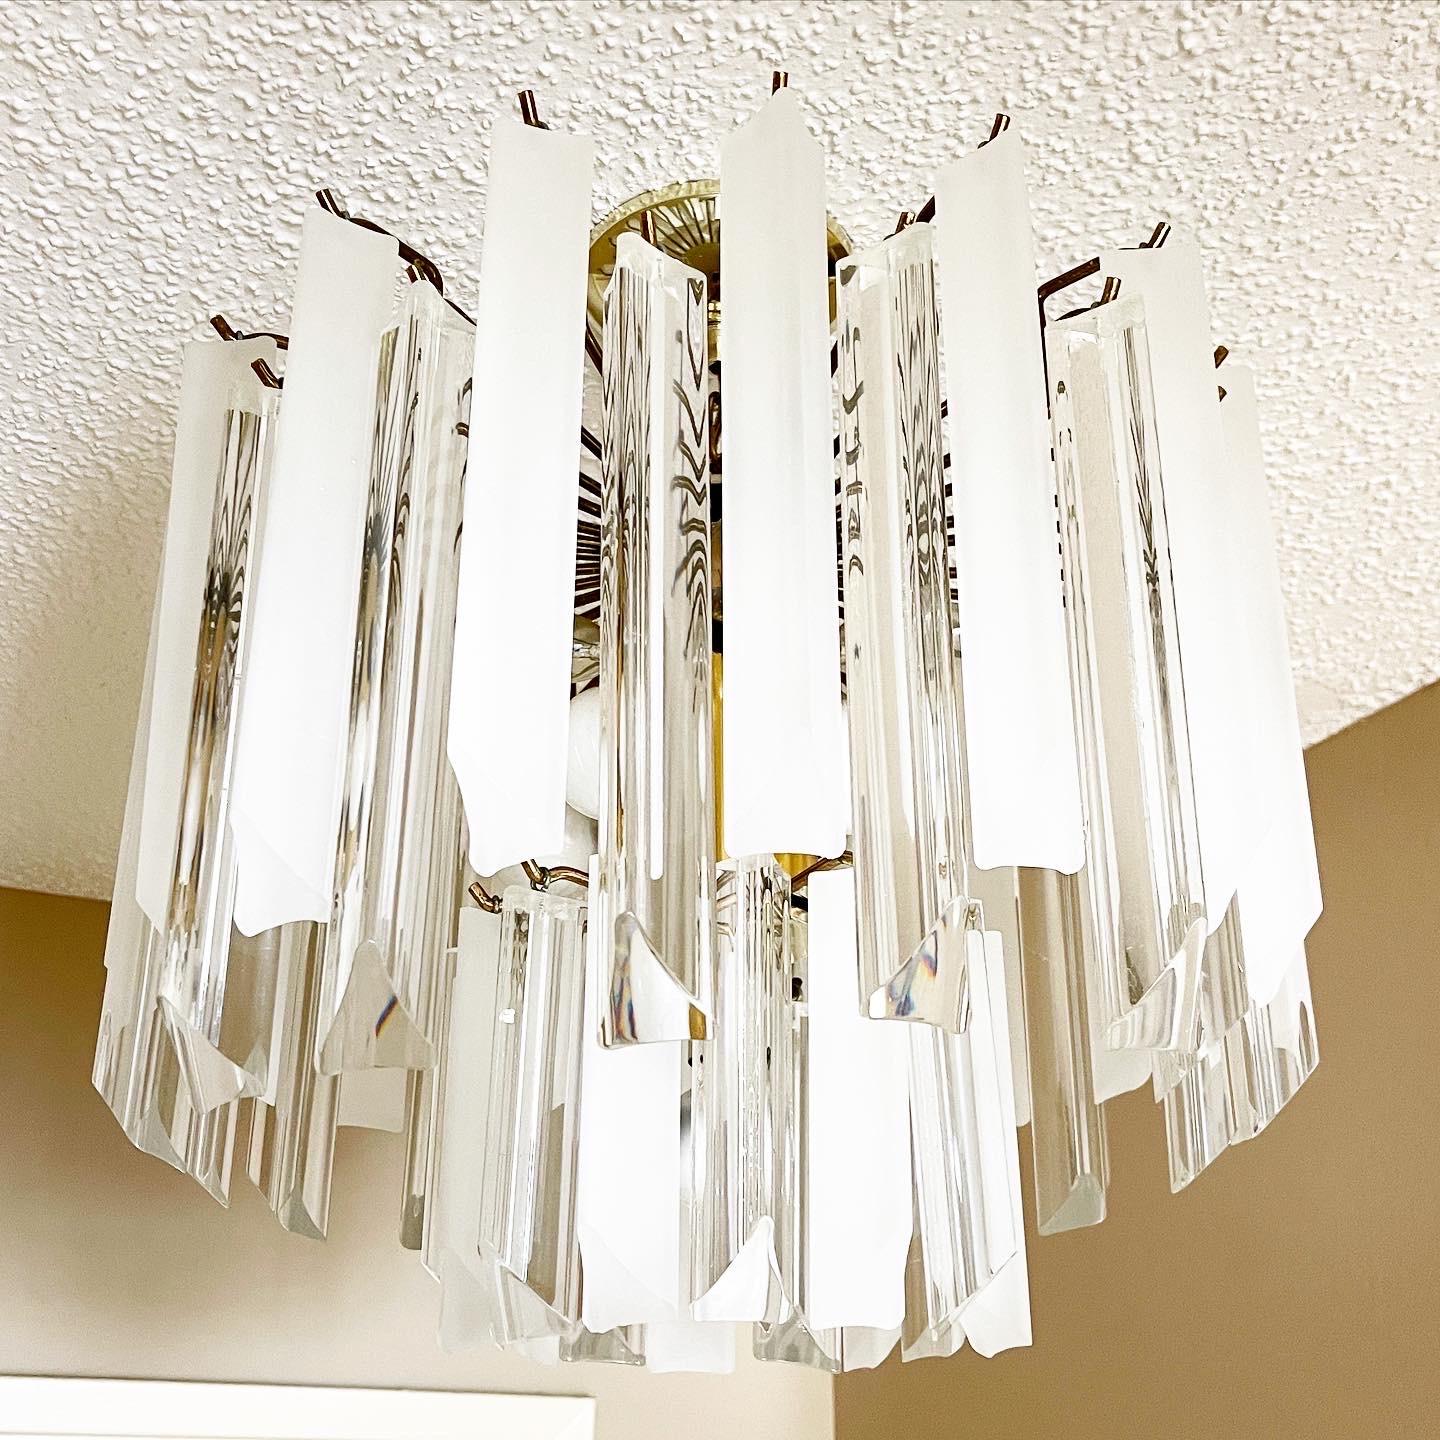 Exceptional vintage mid century modern 2-tier lucite chandelier. Features a gold cage which holds the frosted and clear lucite polygons. Holds 11 bulbs.